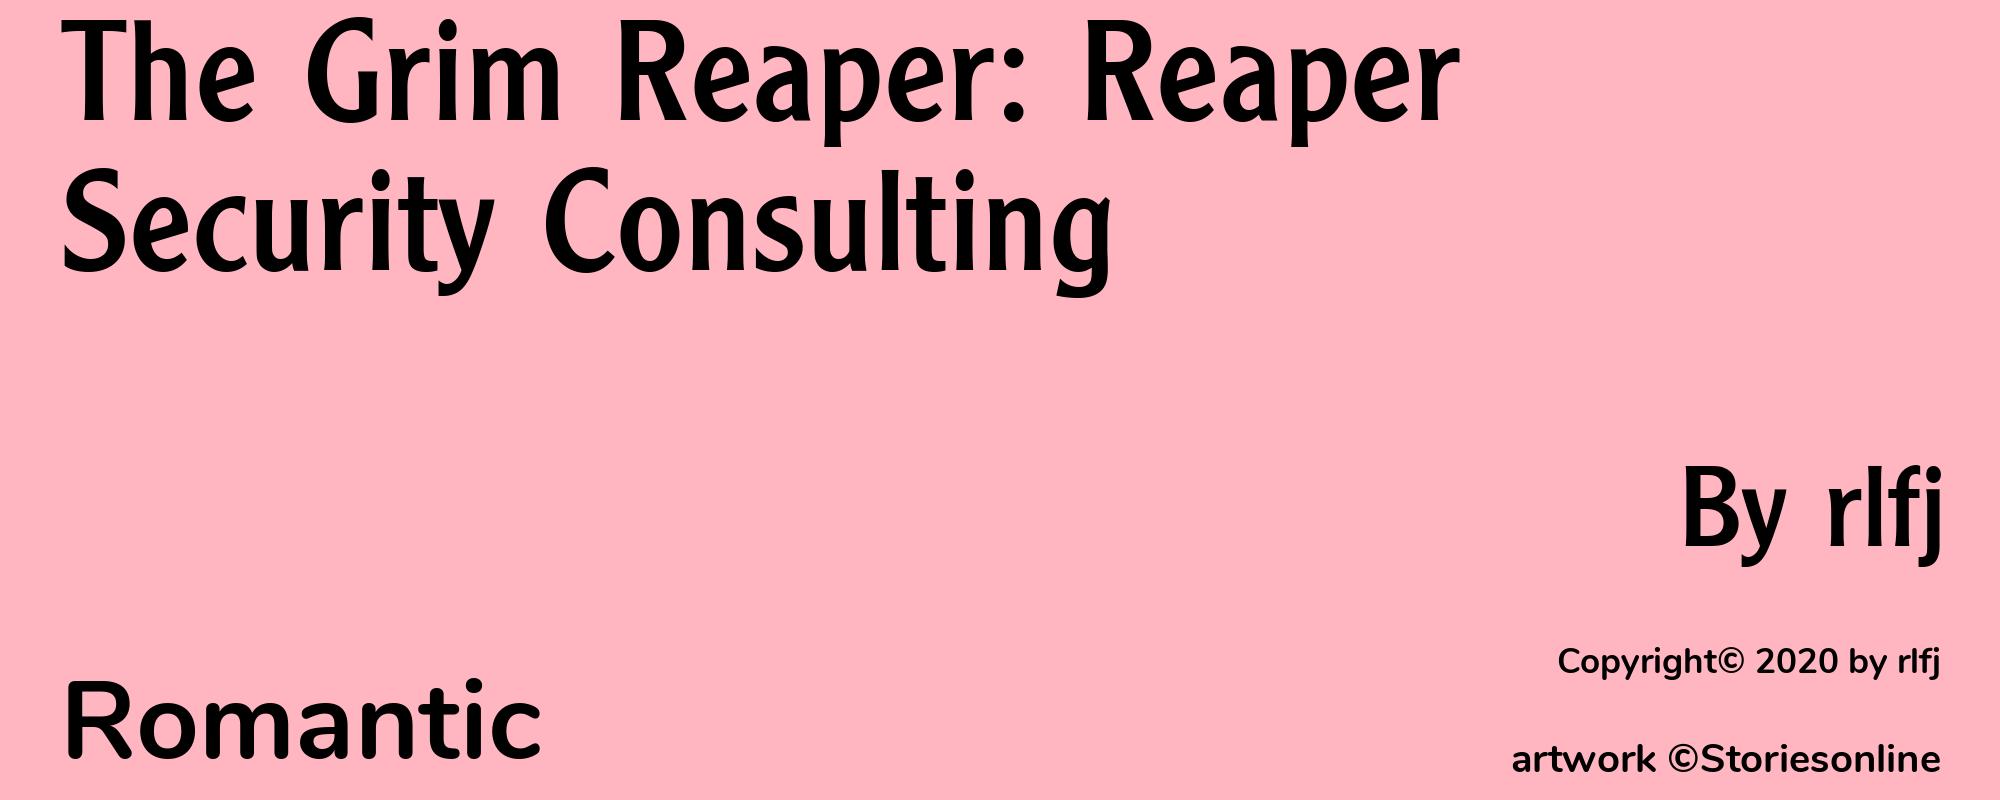 The Grim Reaper: Reaper Security Consulting - Cover